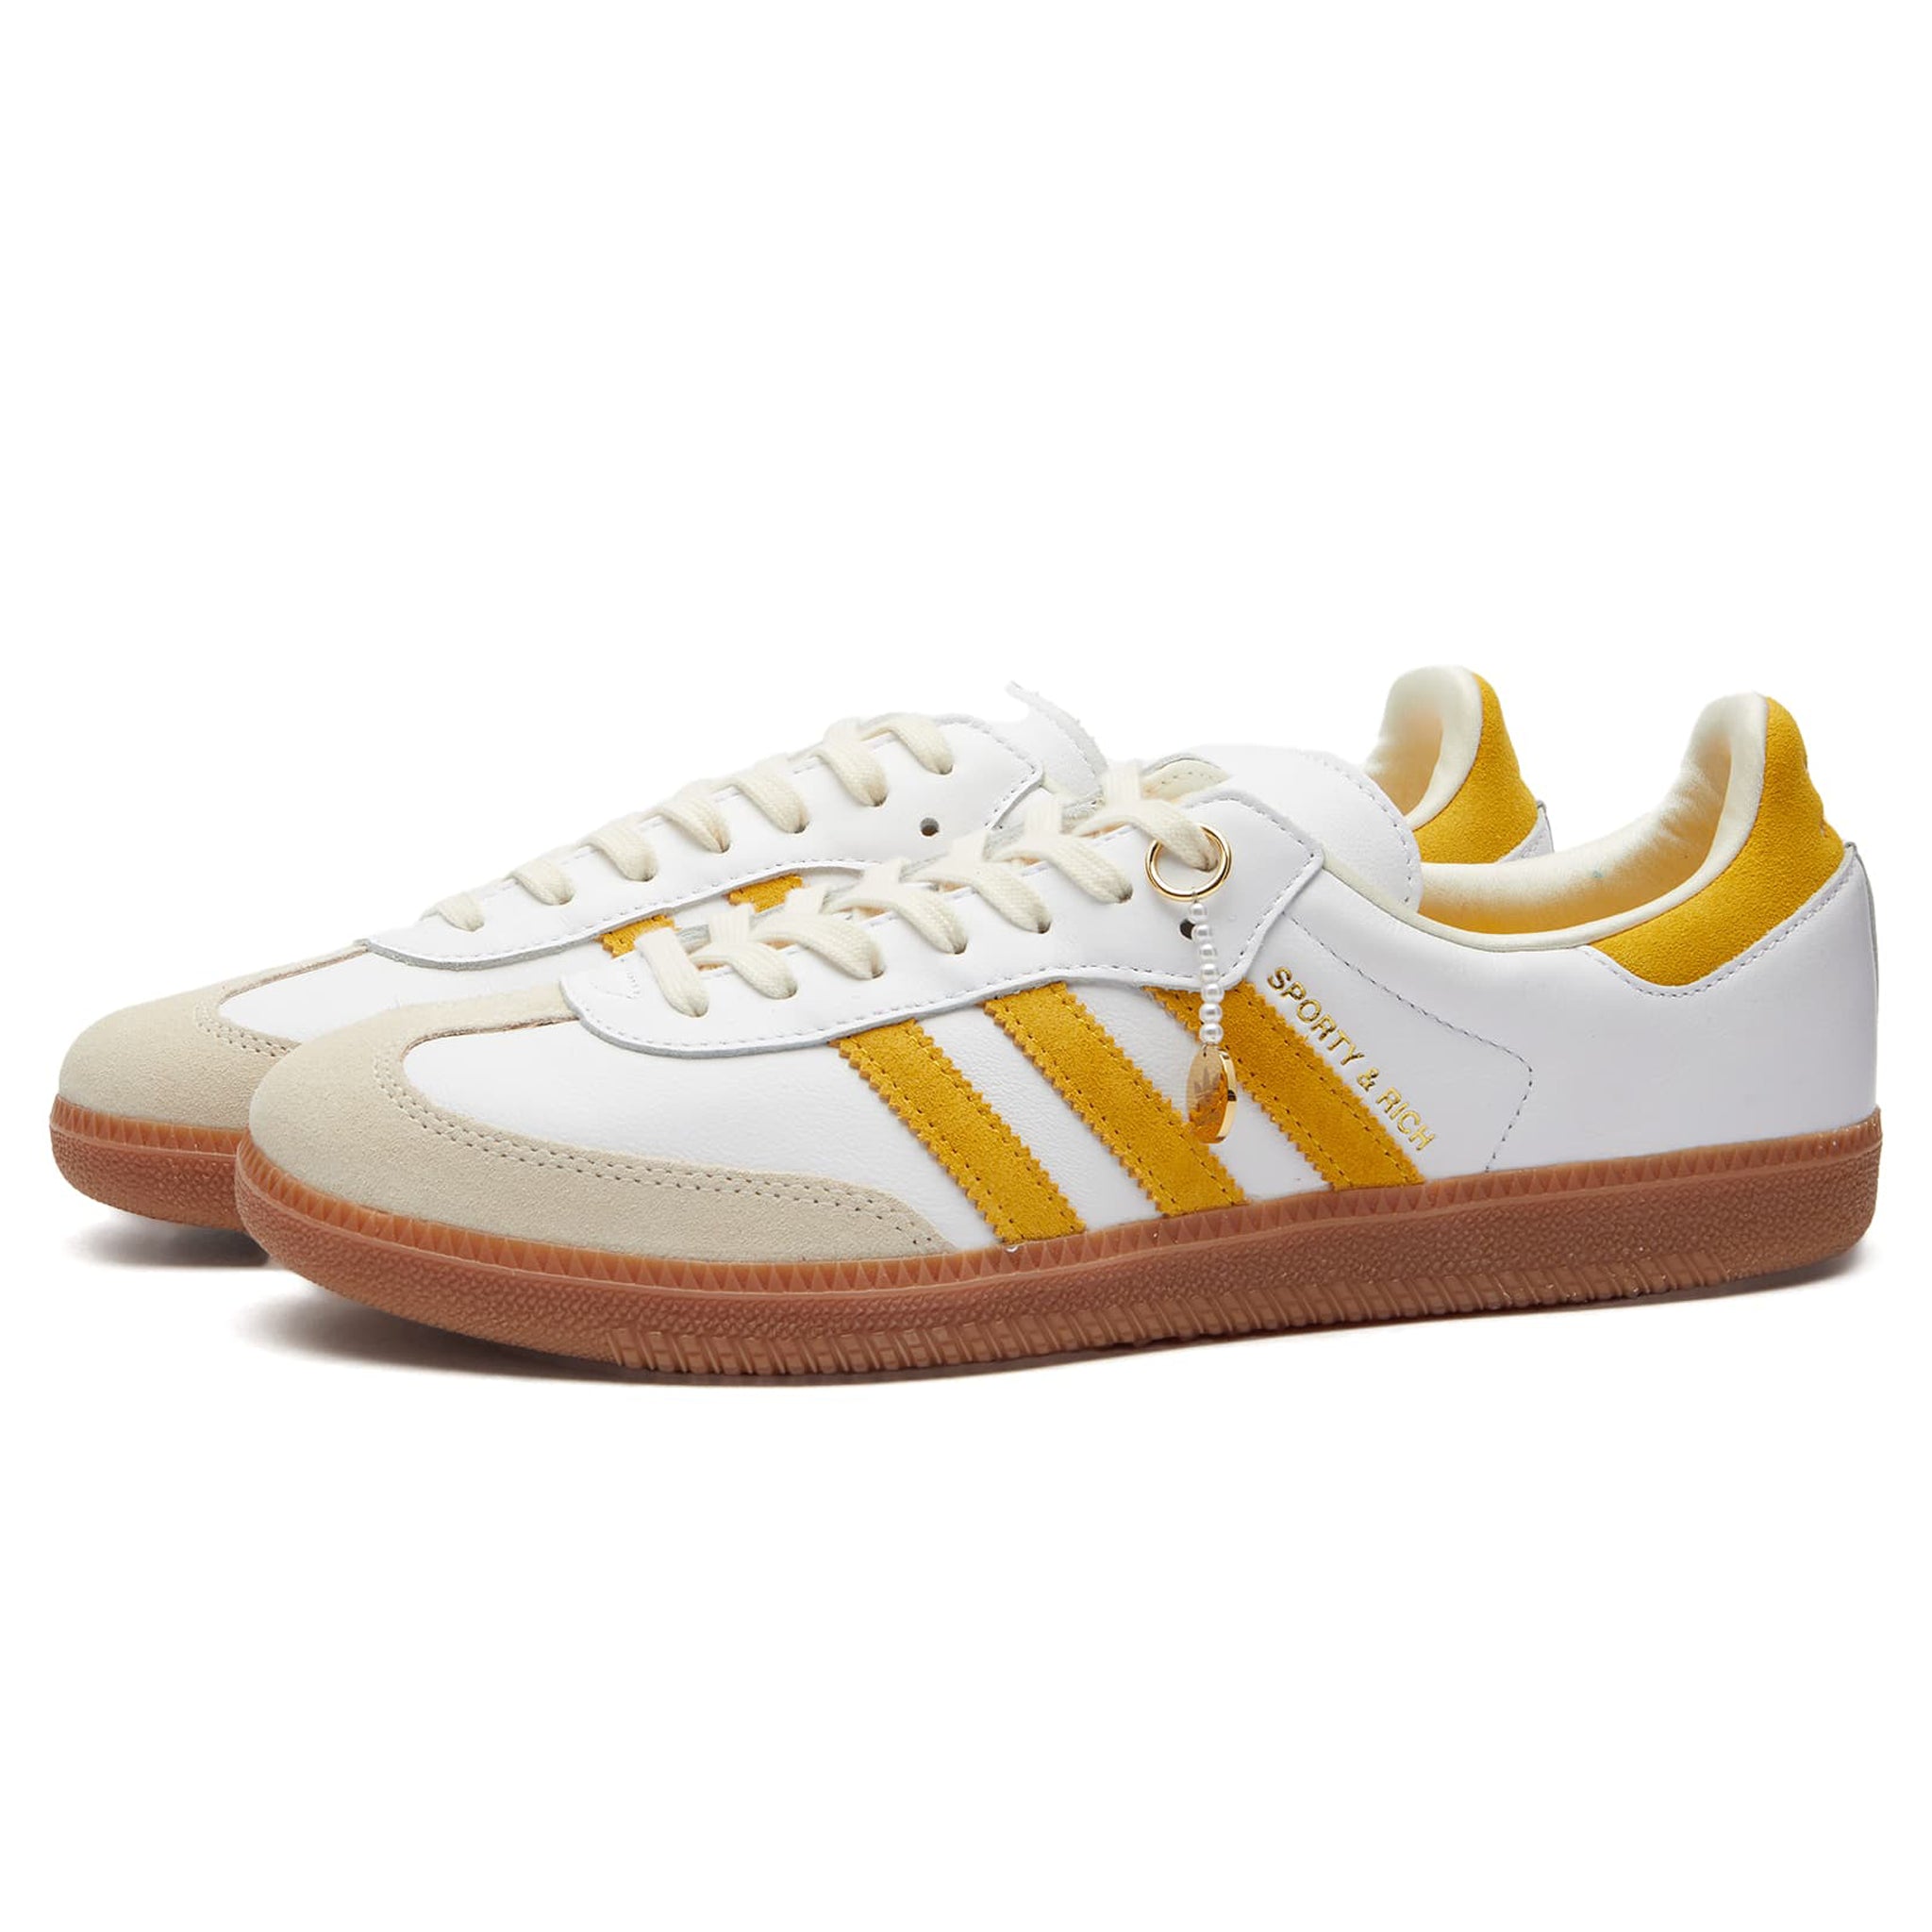 Front side view of Adidas Samba OG Sporty & Rich White Bold Gold IF5661